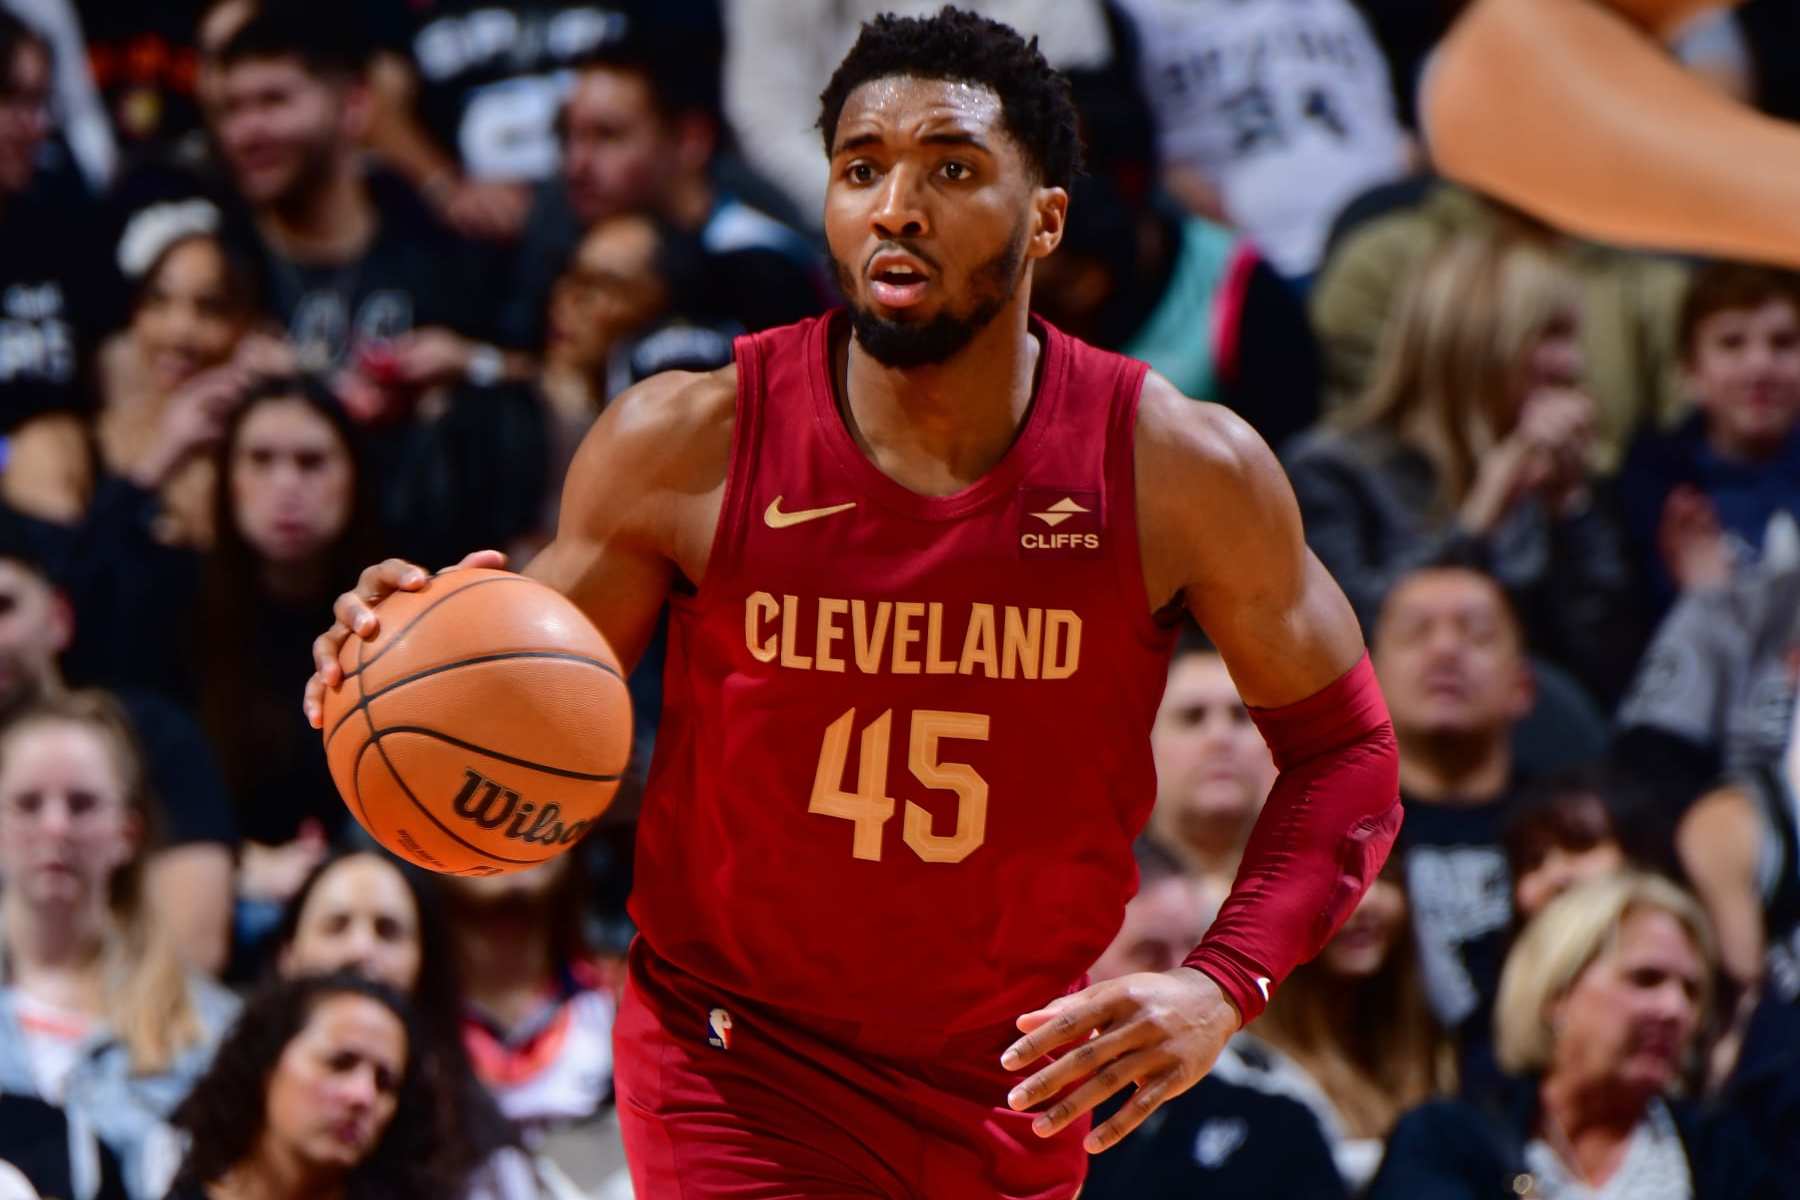 Usher's Slam Dunk Investment The Pop Star's Winning Stake in the Cleveland Cavaliers